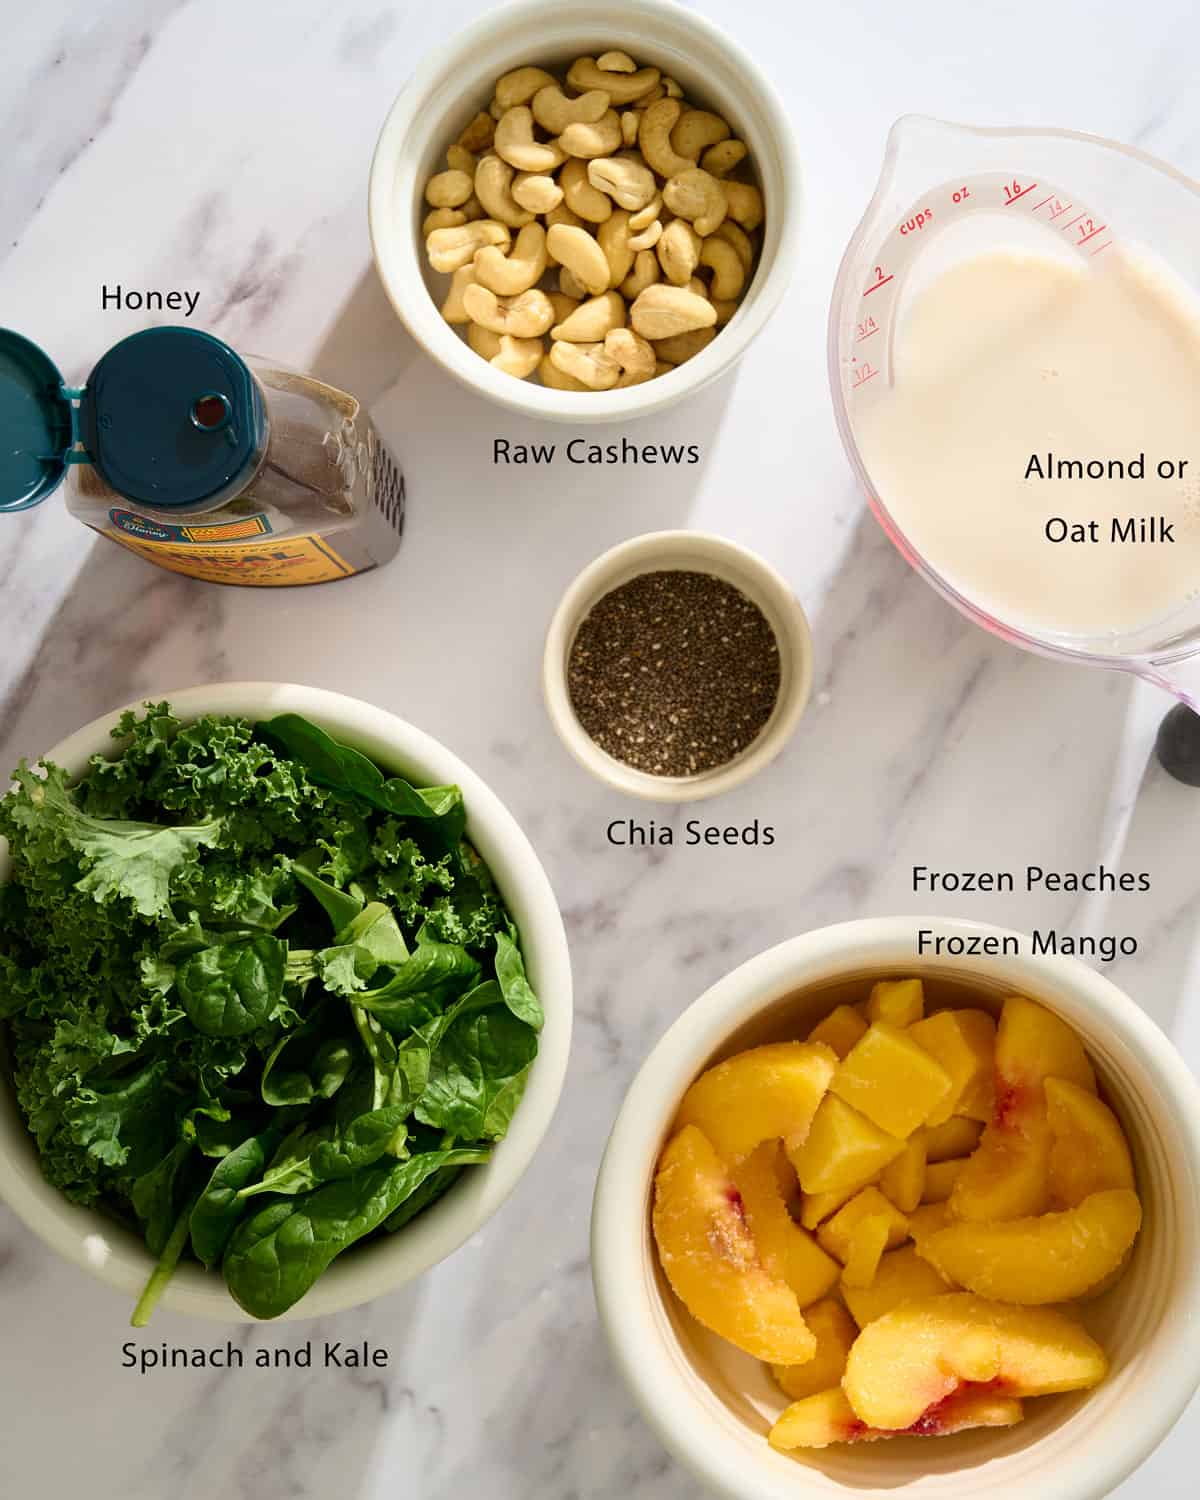 Ingredients needed to make kale and spinach smoothies.